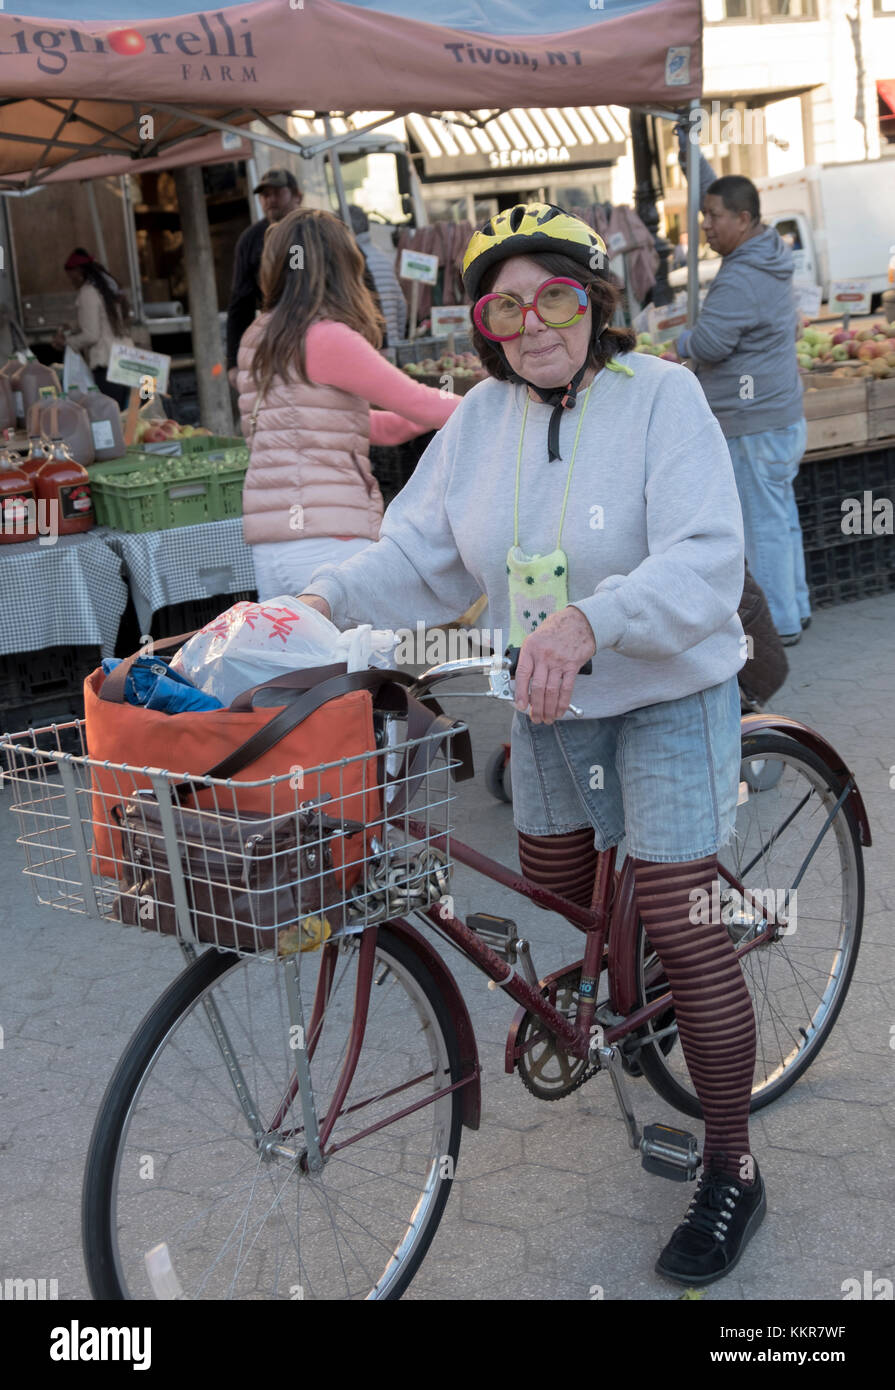 A woman on a bicycle with an individual sense of style at the Union Square Green Market in Manhattan, New York City Stock Photo